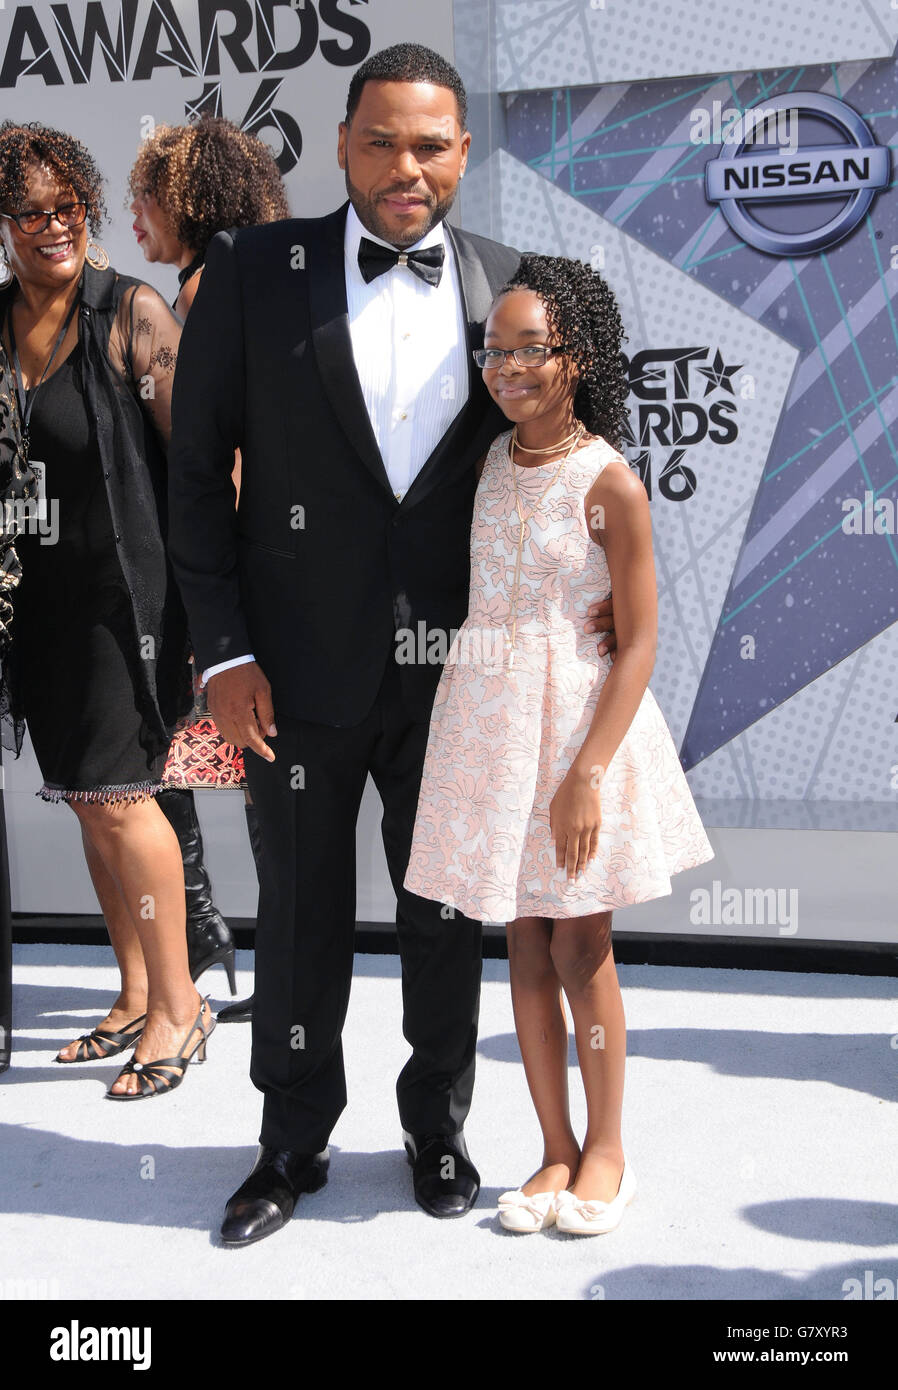 Los Angeles, CA, USA. 26th June, 2016. 26 June 2016 - Los Angeles. Anthony Anderson, Marsai Martin. Arrivals for the 2016 BET Awards held at the Microsoft Theater. Credit:  ZUMA Press, Inc./Alamy Live News Stock Photo